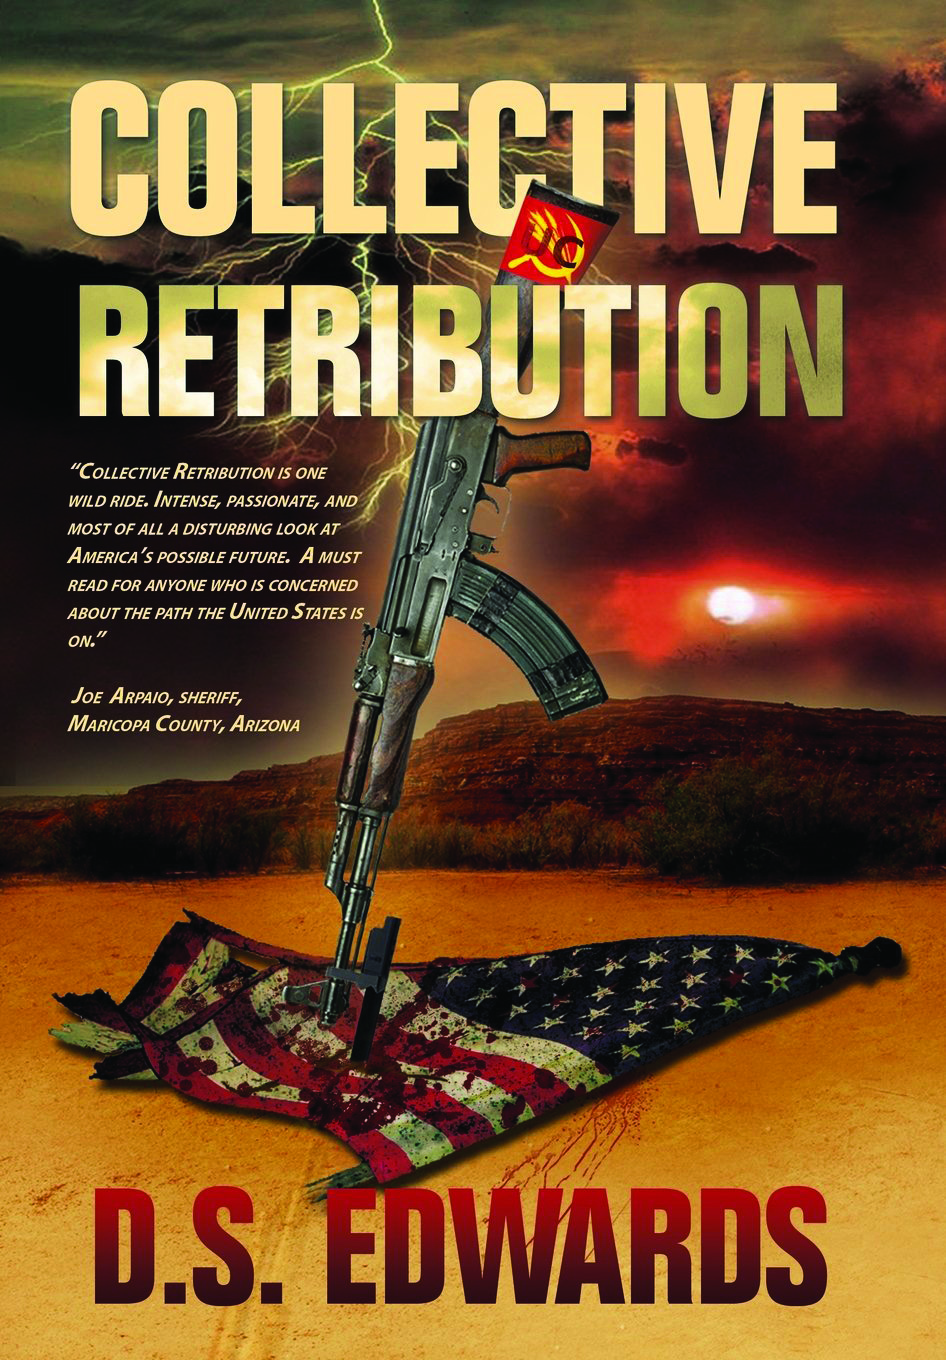 LEX LUTHOR’S BOOK REVIEWS – Collective Retribution by D.S. Edwards